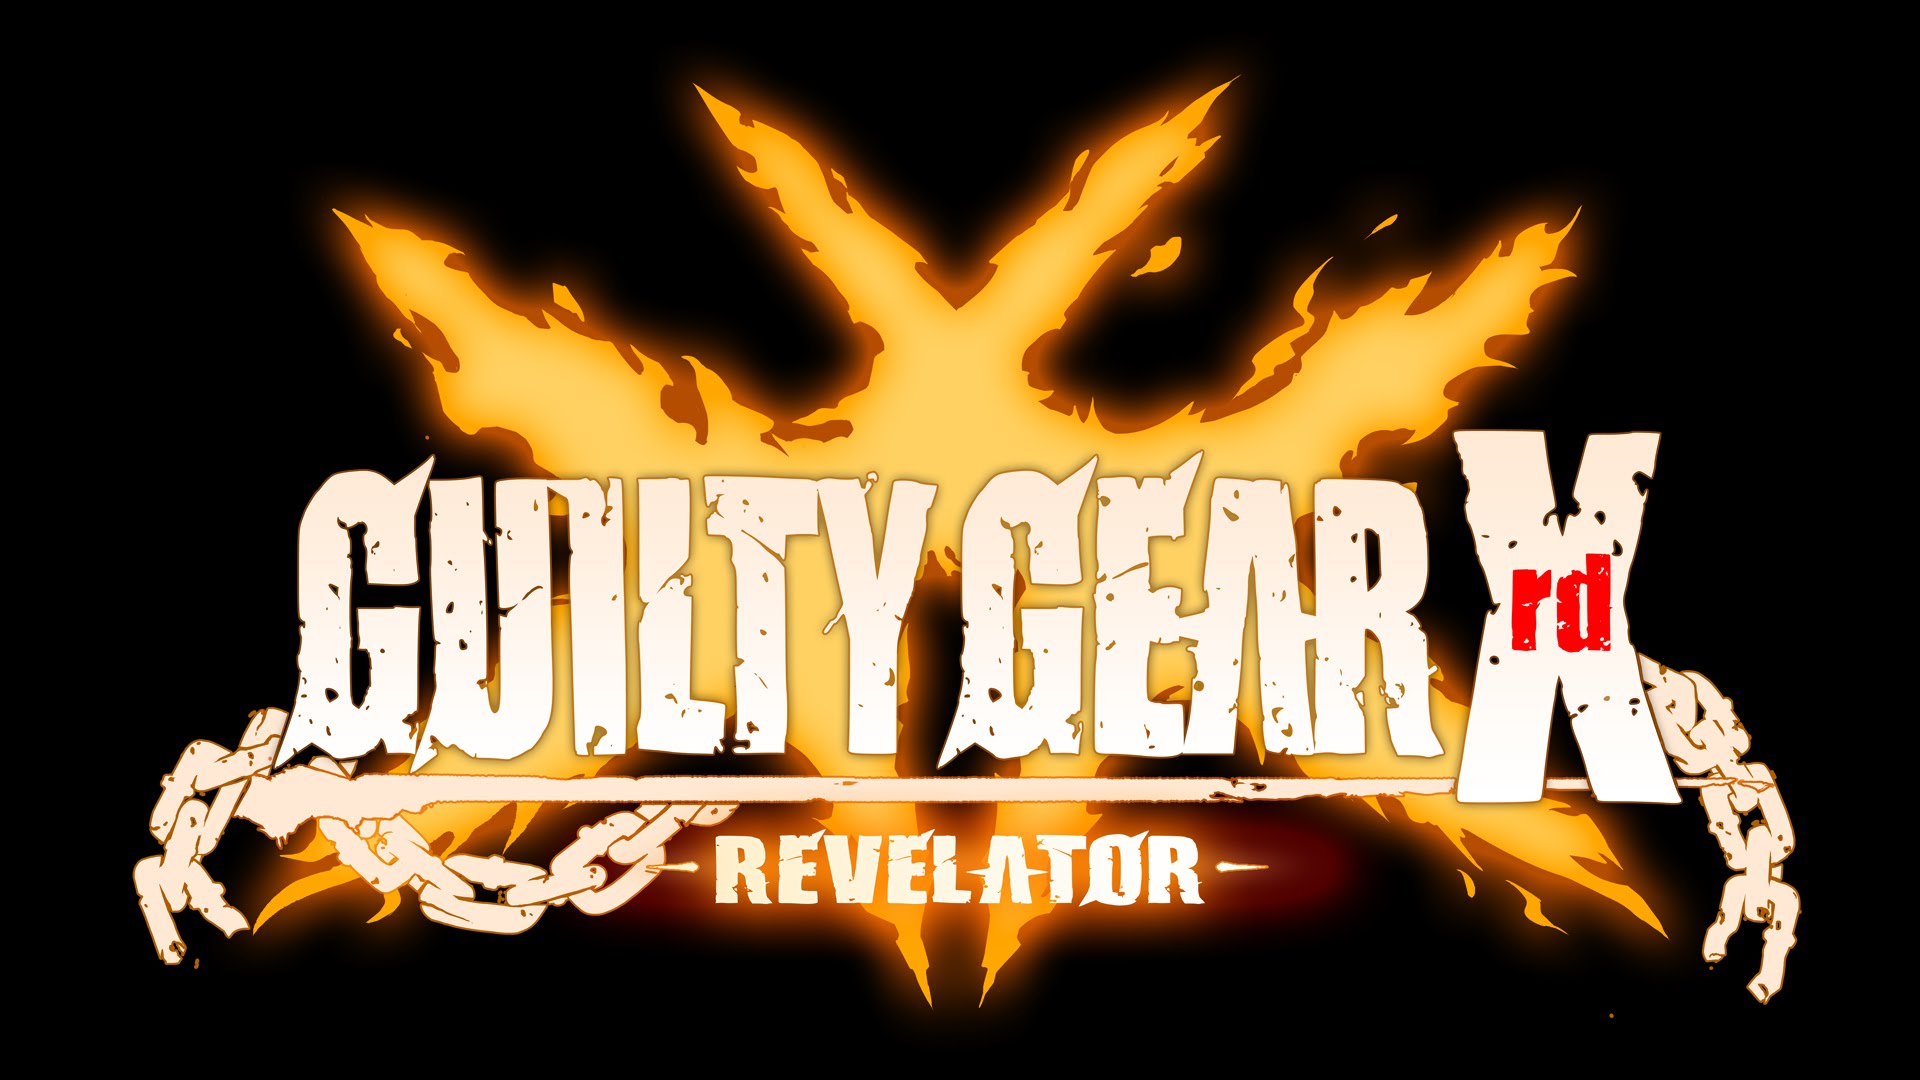 GUILTY GEAR Xrd -REVELATOR- lands in Japanese arcades on August 25th.